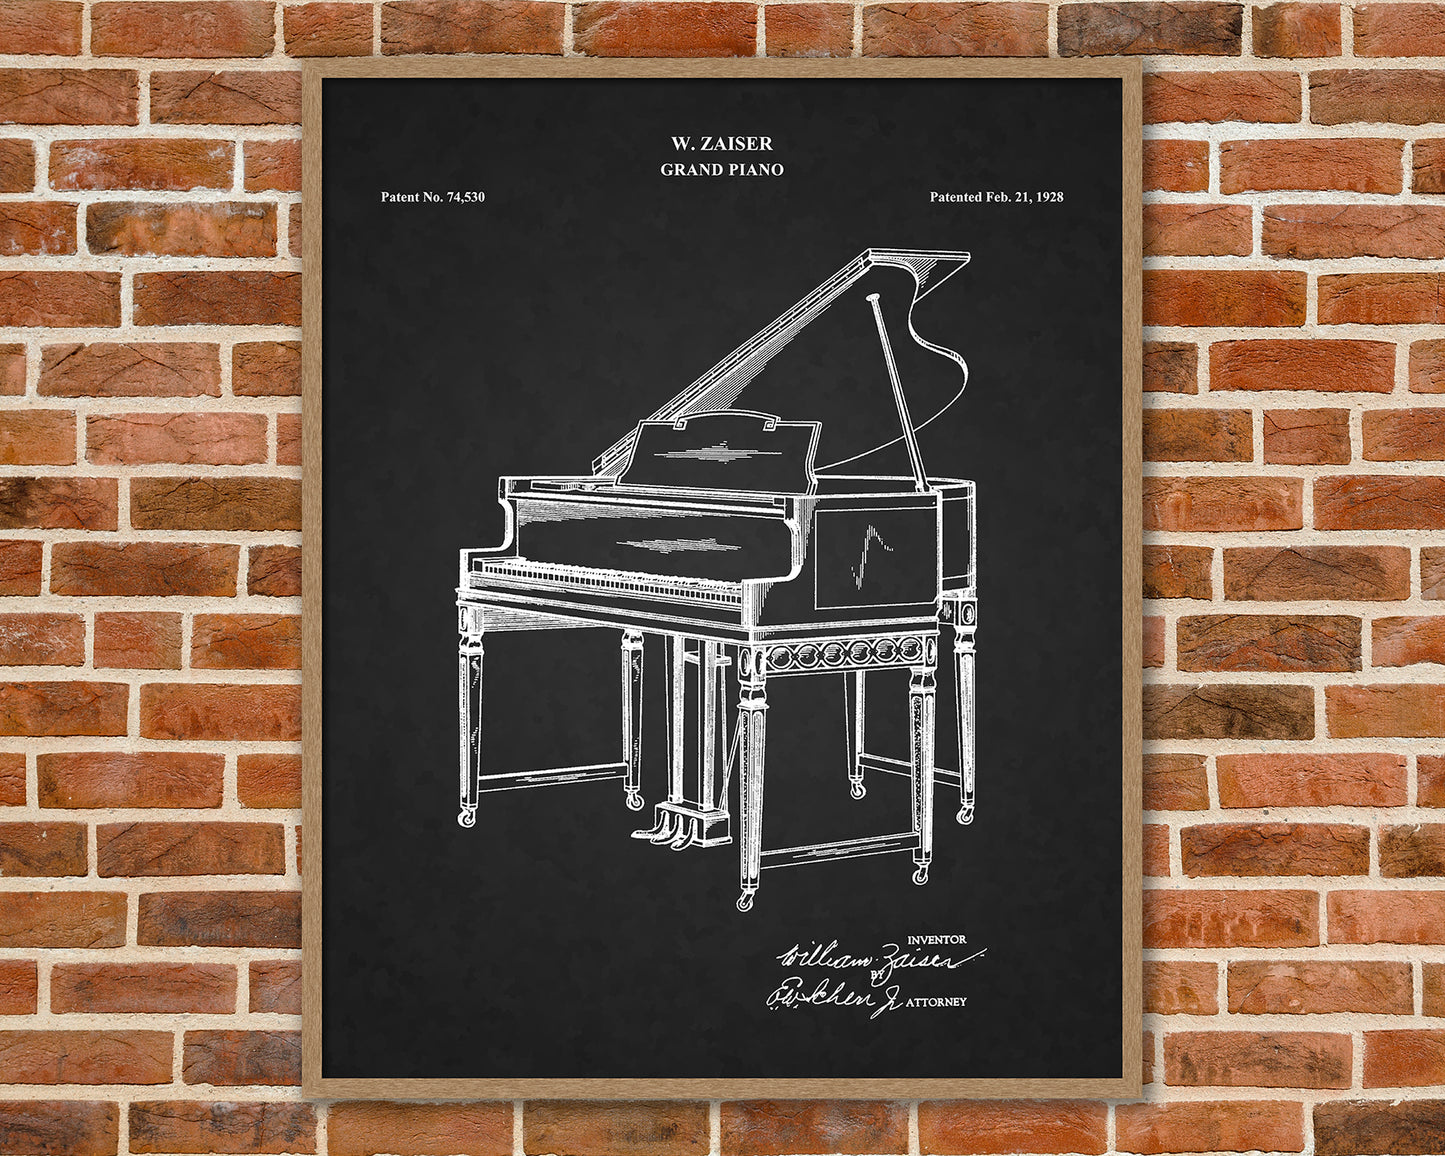 Grand Piano Patent Drawings, Music Studio Wall Art Poster, Great Vintage Room Decor, Art Prints, Musician Decor Gifts 03102